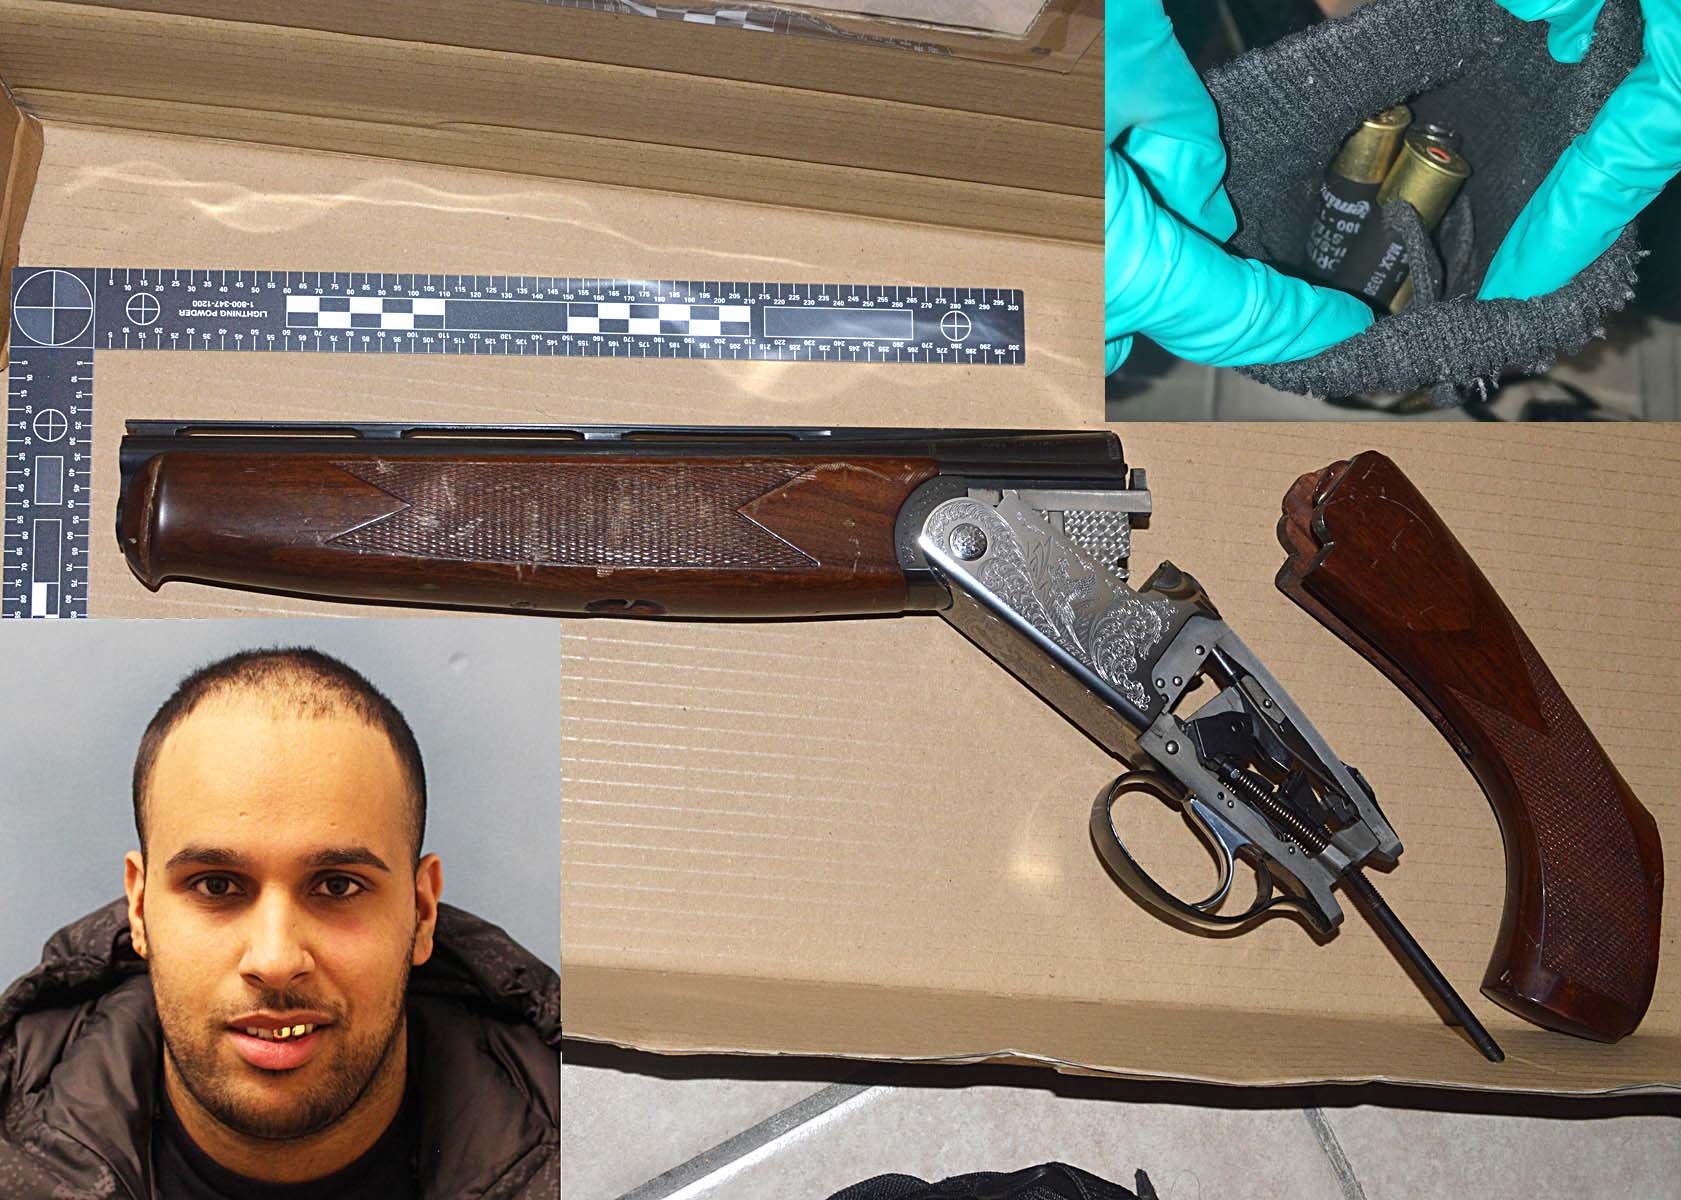 Mohamed Hamza Riaz, 21, of Tadworth Road, NW2 has been jailed for five years after police found a shotgun and live ammunition at a residential address in Brent.